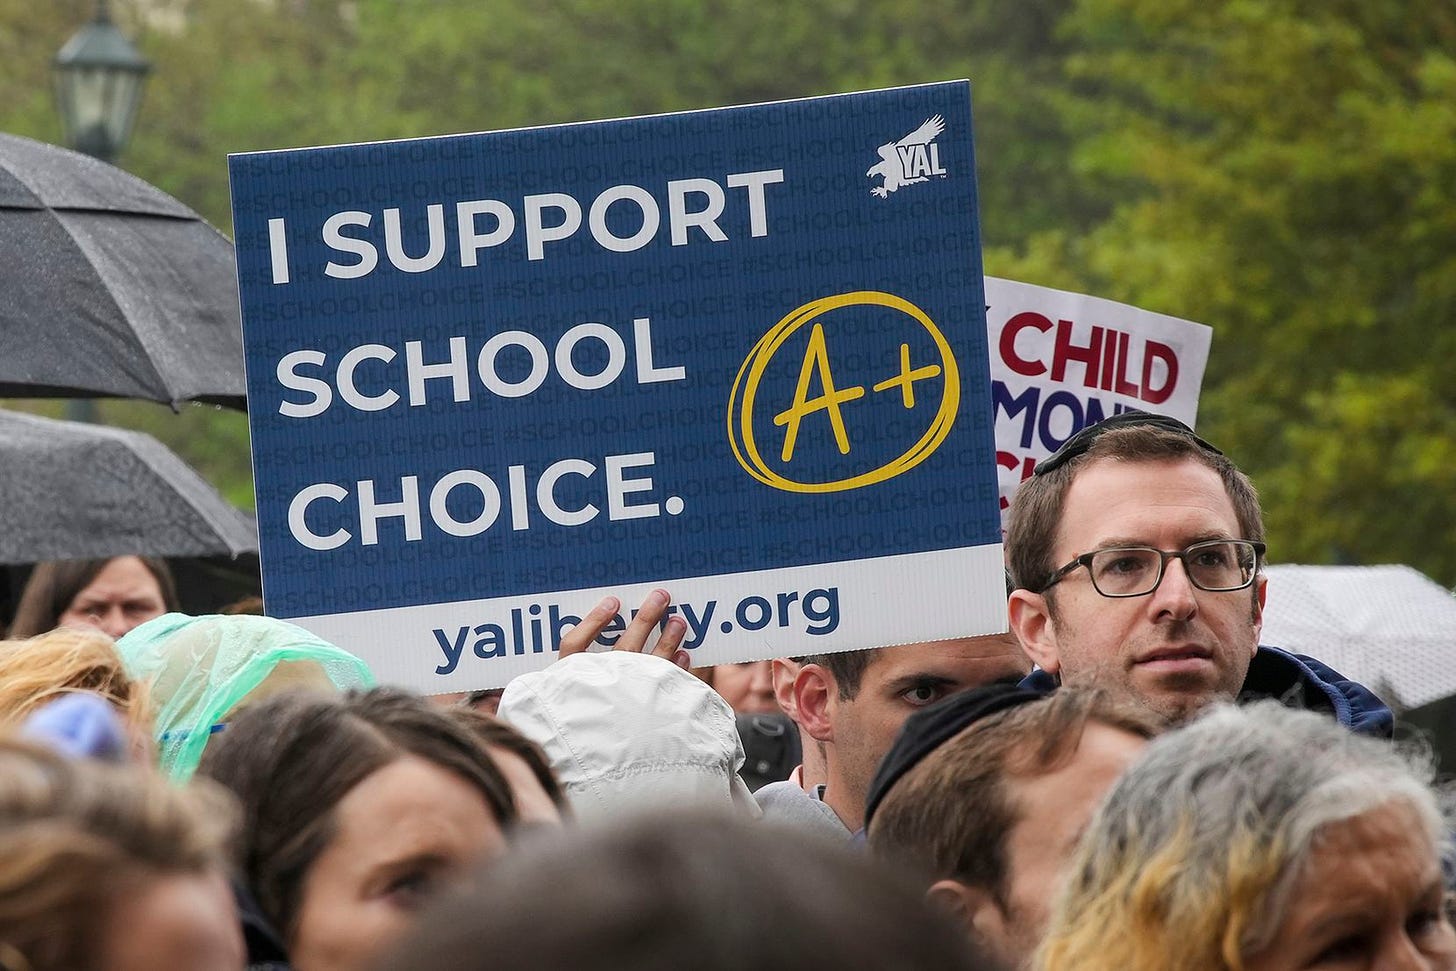 Stop using 'school choice' to describe vouchers